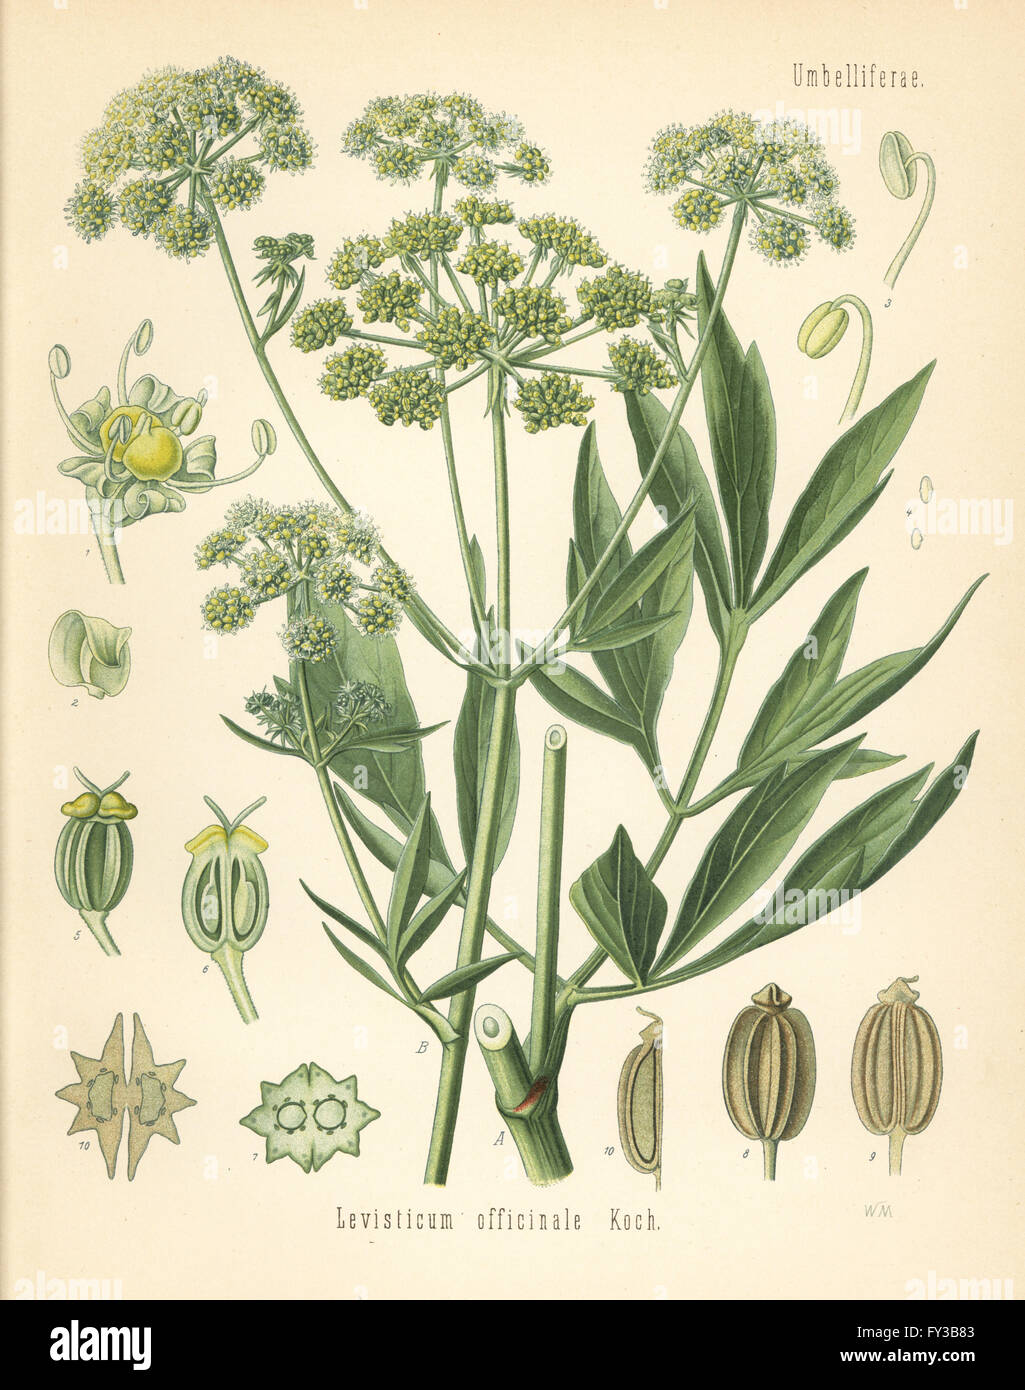 Lovage, Levisticum officinale. Chromolithograph after a botanical illustration by Walther Muller from Hermann Adolph Koehler's Medicinal Plants, edited by Gustav Pabst, Koehler, Germany, 1887. Stock Photo